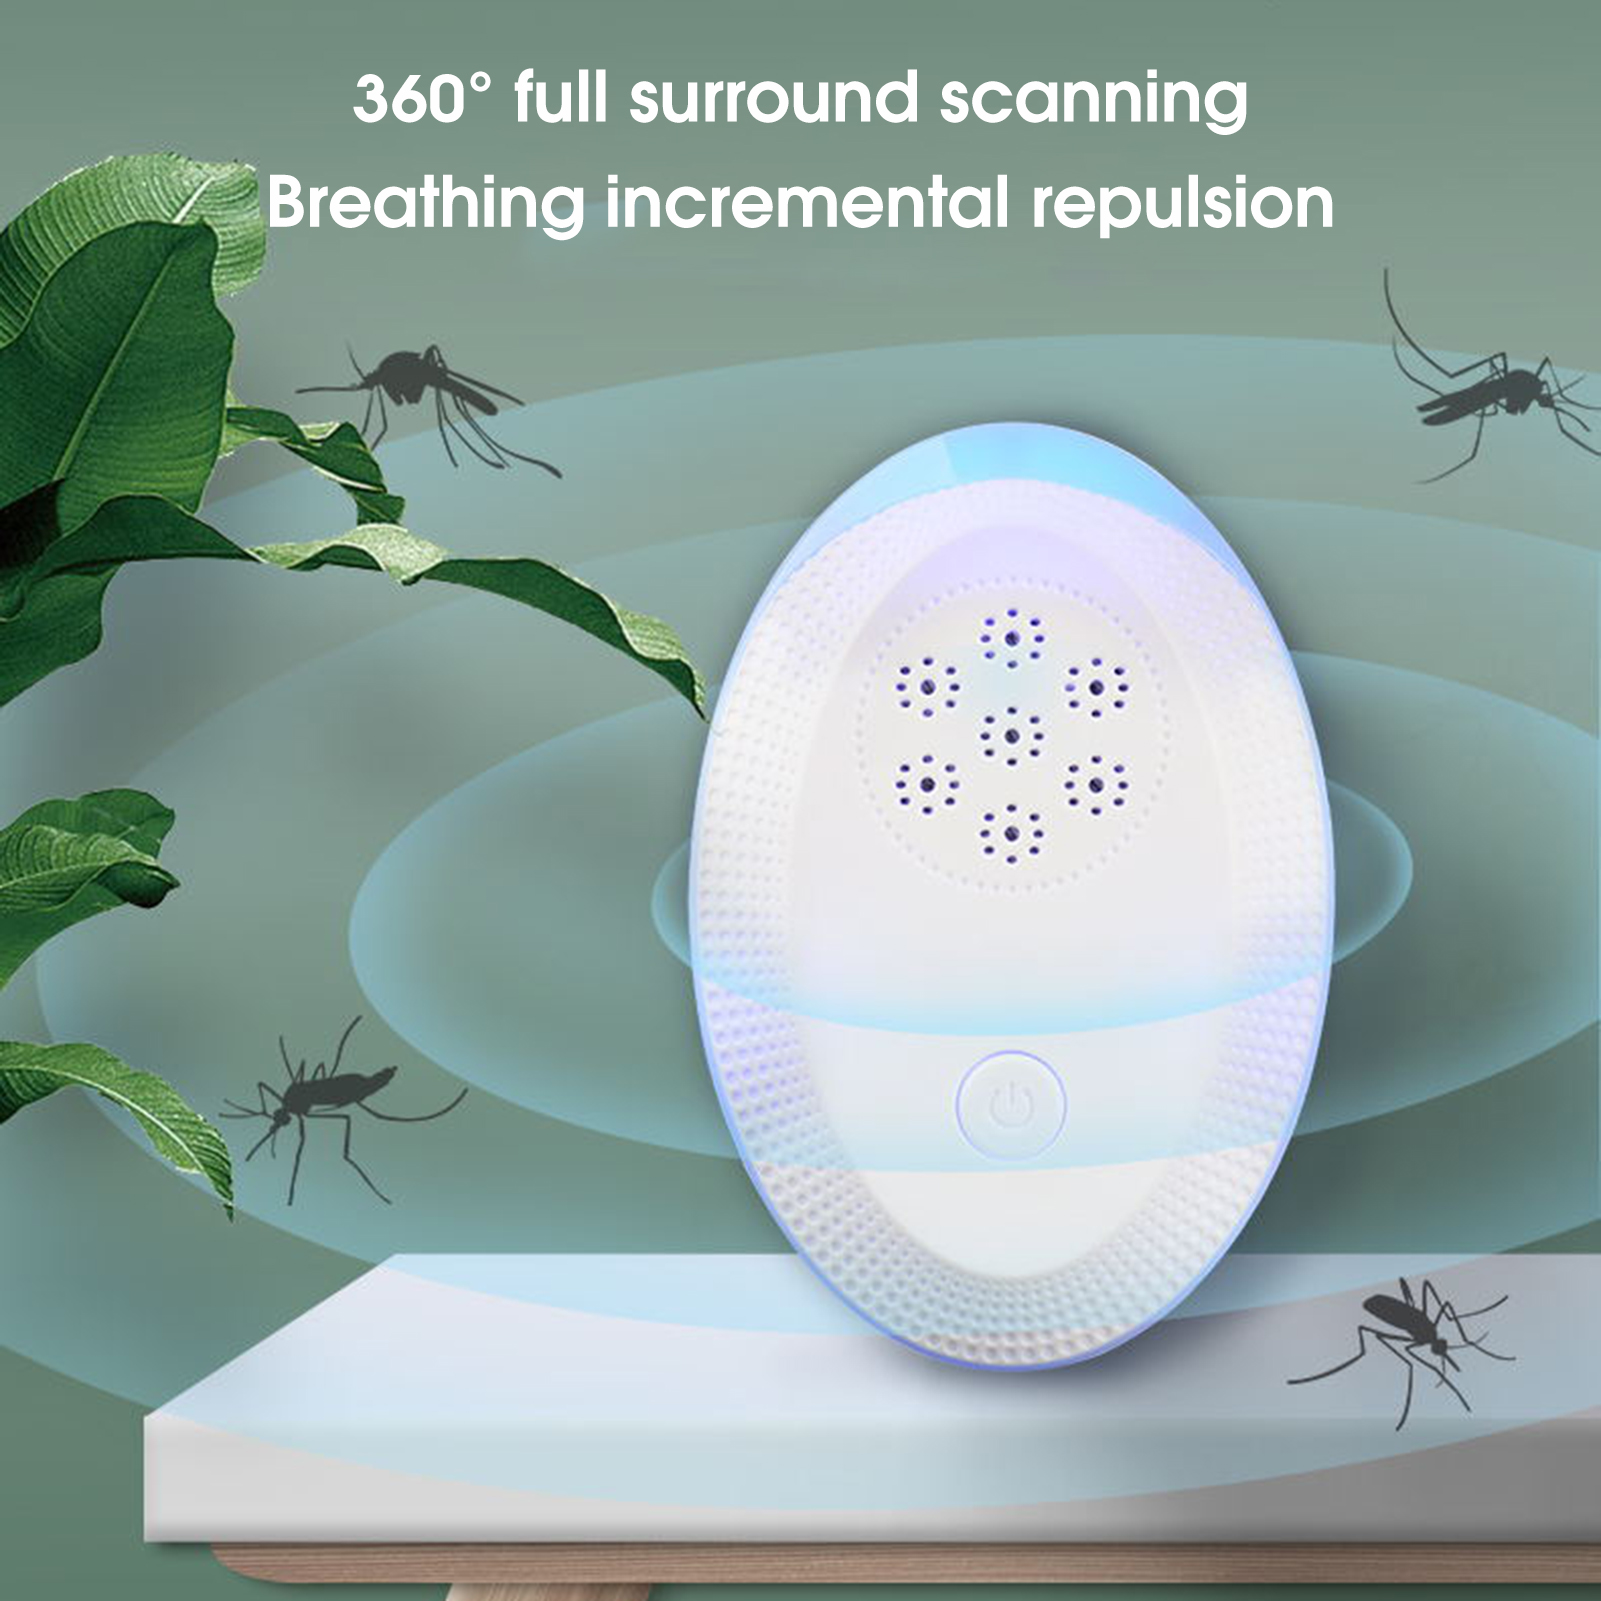 Ultrasonic Pest Repeller 8 Packs Pest Repellent Mosquito Repellent Indoors Mouse Repellent Pest Repellent Ultrasonic Plug in Rodent Repellent Pest Control for Mosquito,Ant,Spider,Cockroach,Mouse DY...